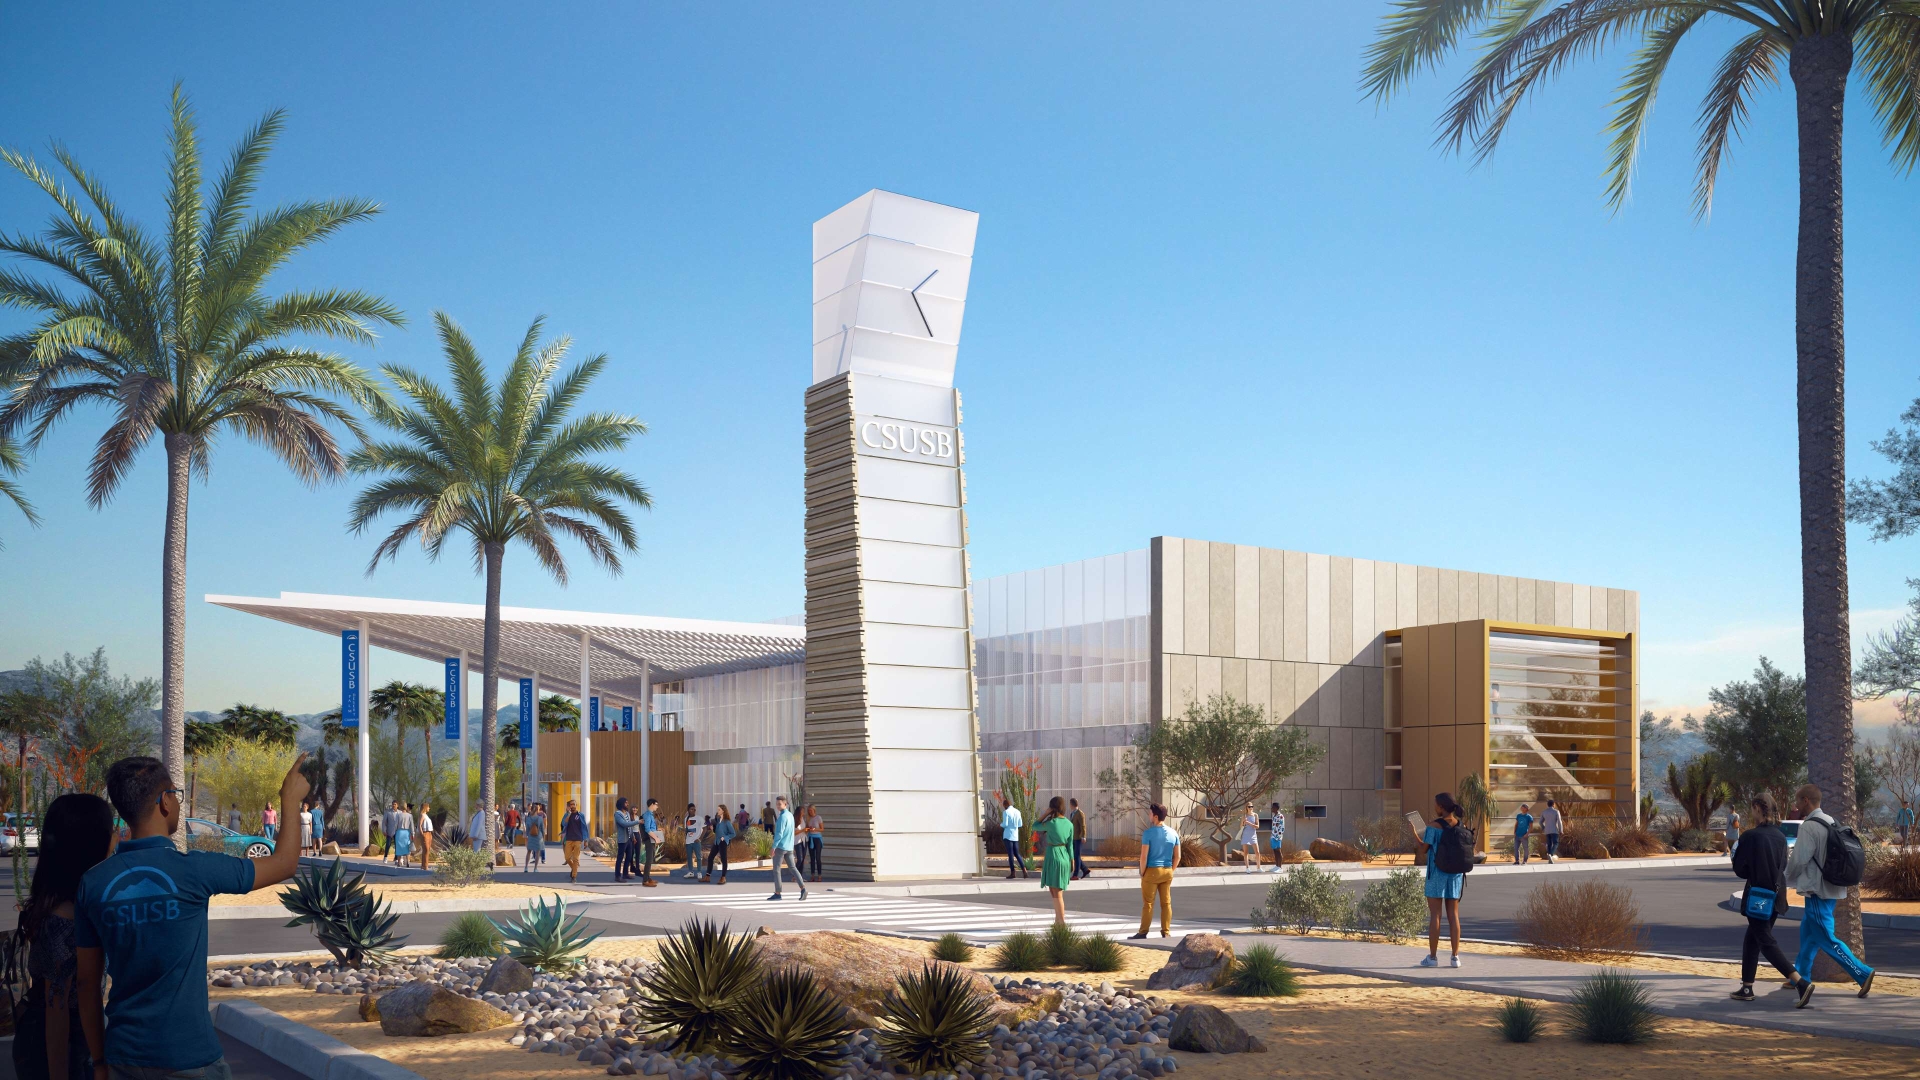 Artist rendering of the new Palm Desert Campus Student Services Building.